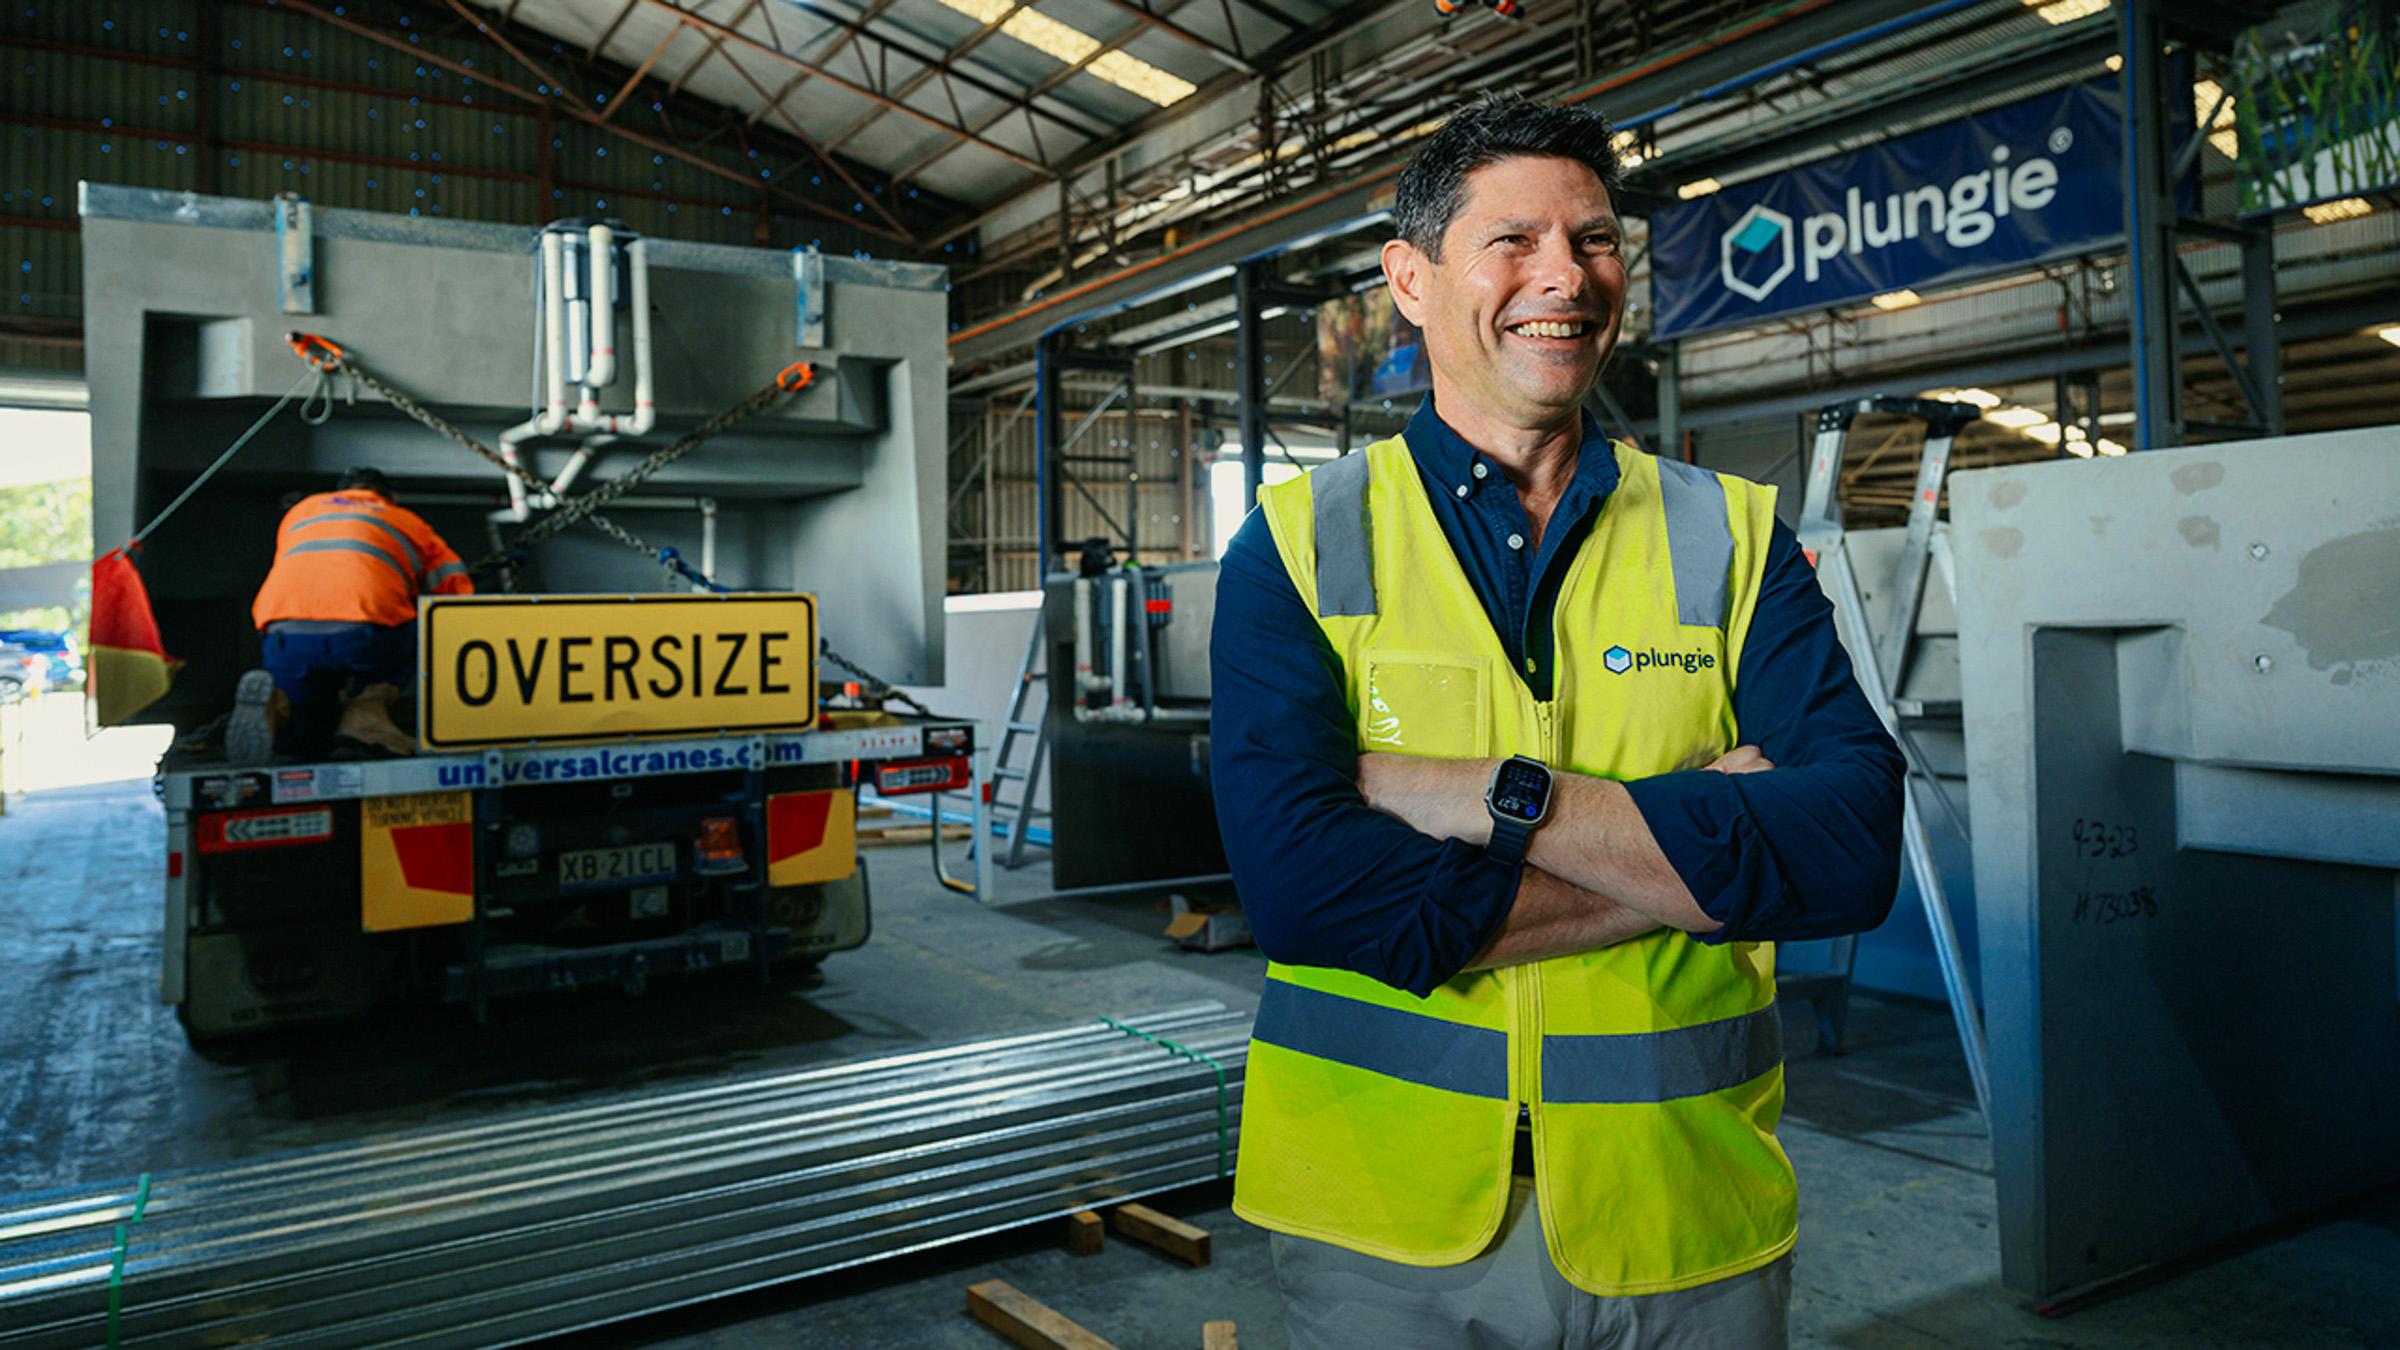 Smiling man wearing high-vis in a warehouse